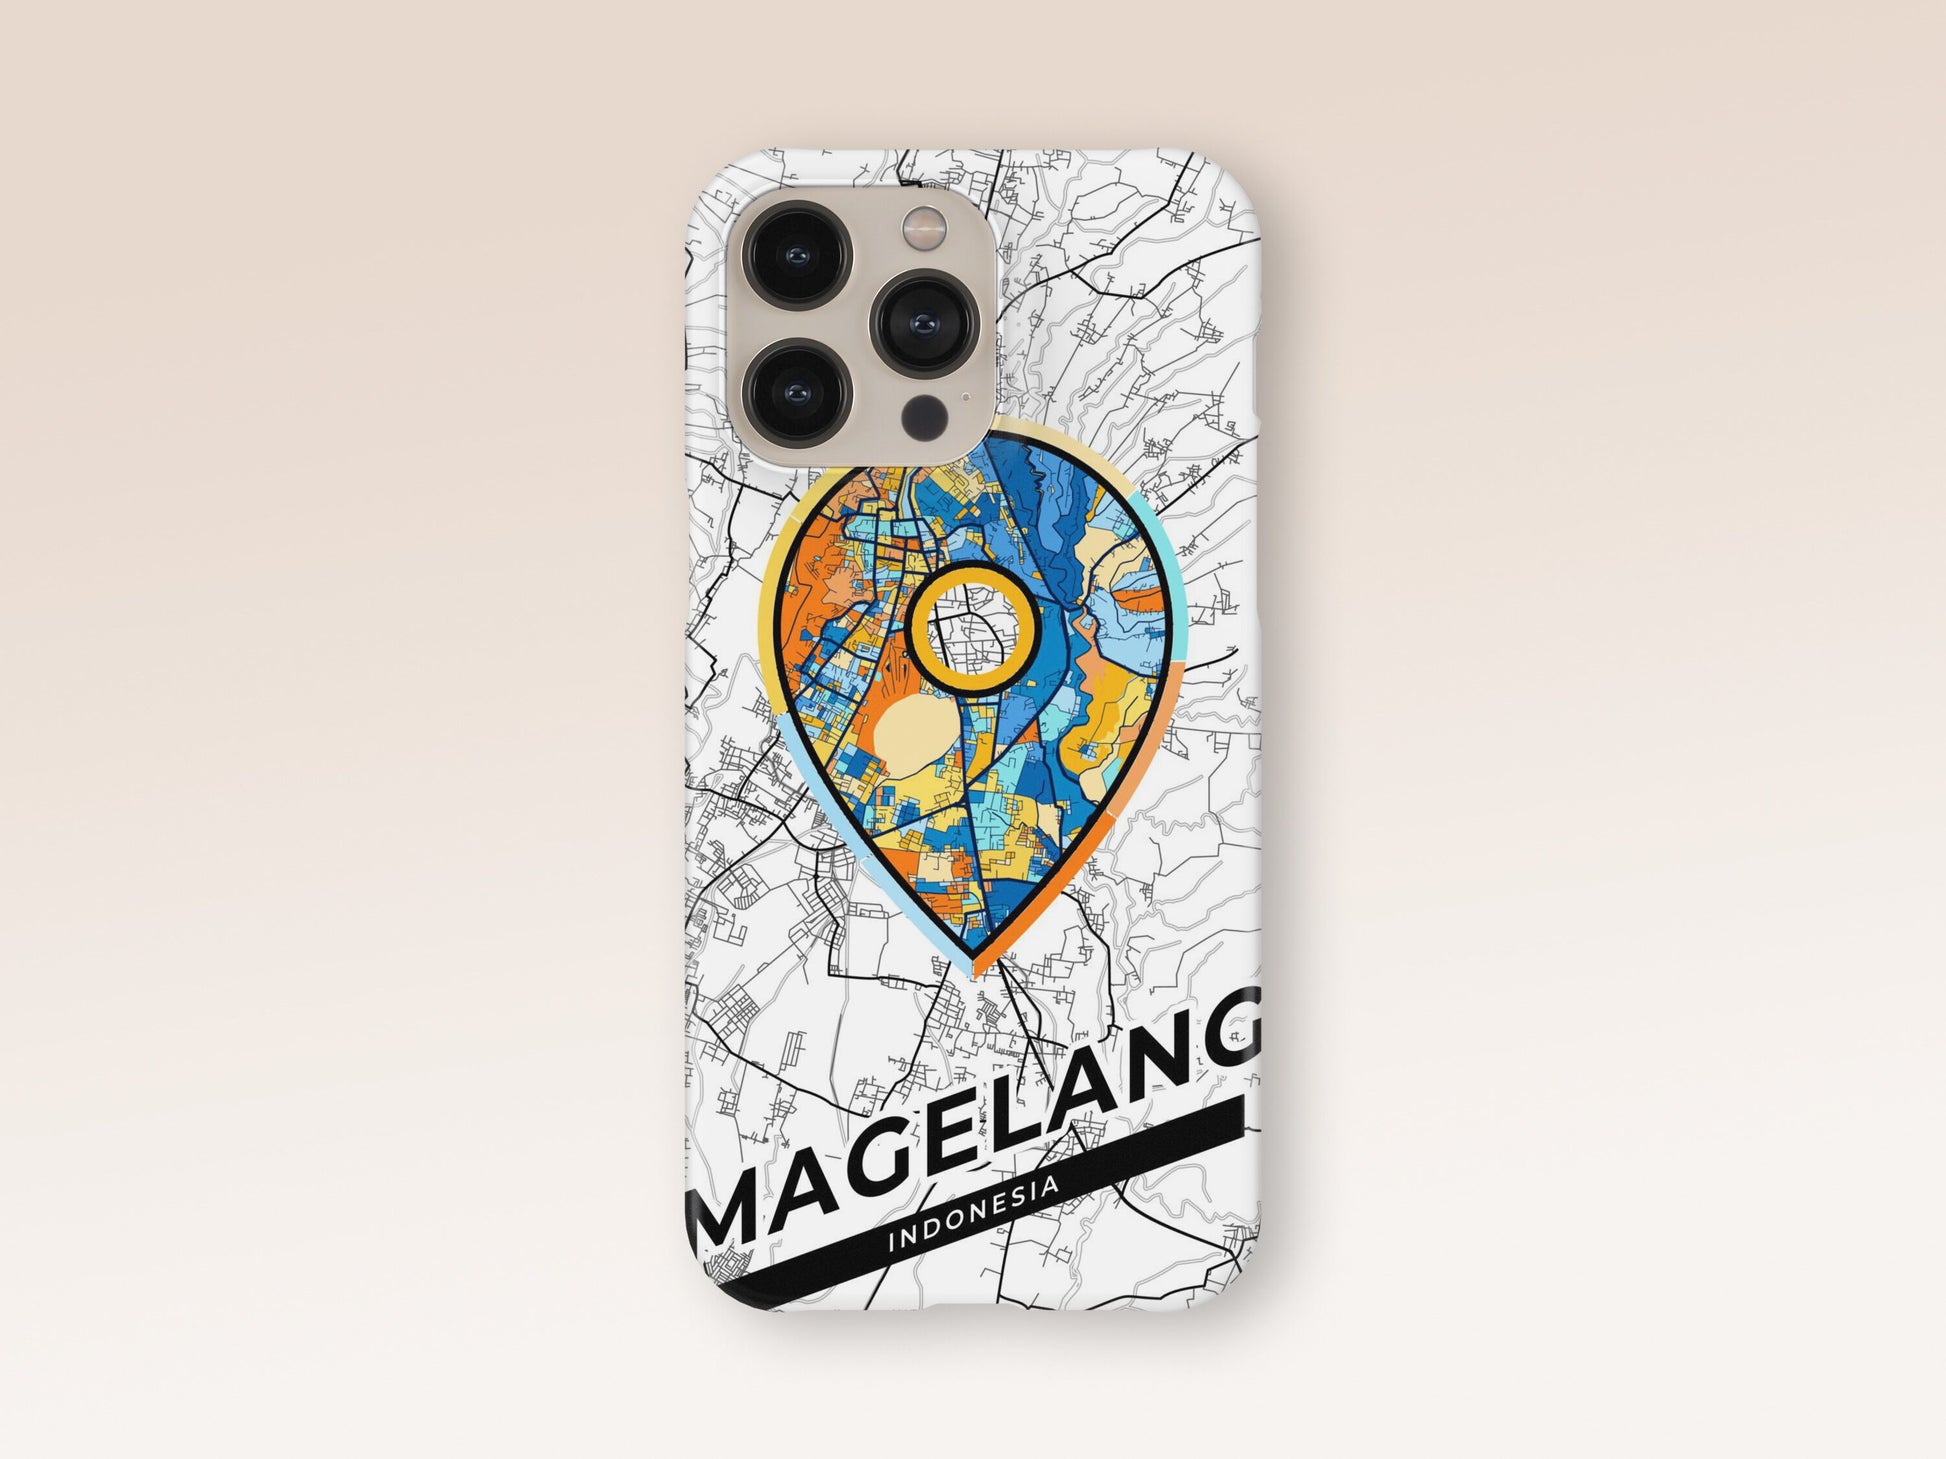 Magelang Indonesia slim phone case with colorful icon. Birthday, wedding or housewarming gift. Couple match cases. 1